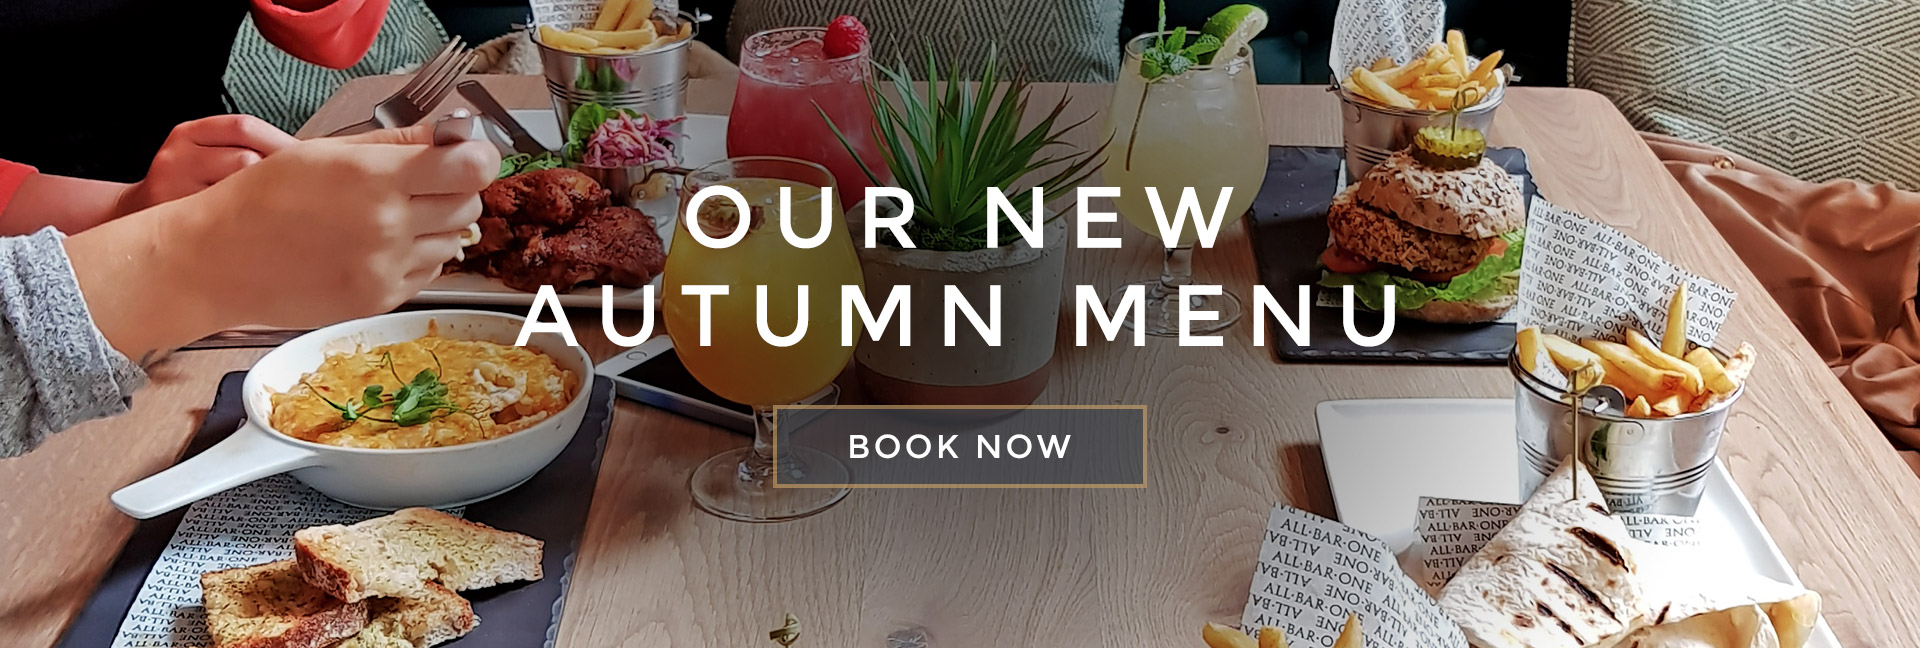 Our new Autumn menu at All Bar One Portsmouth - Book now